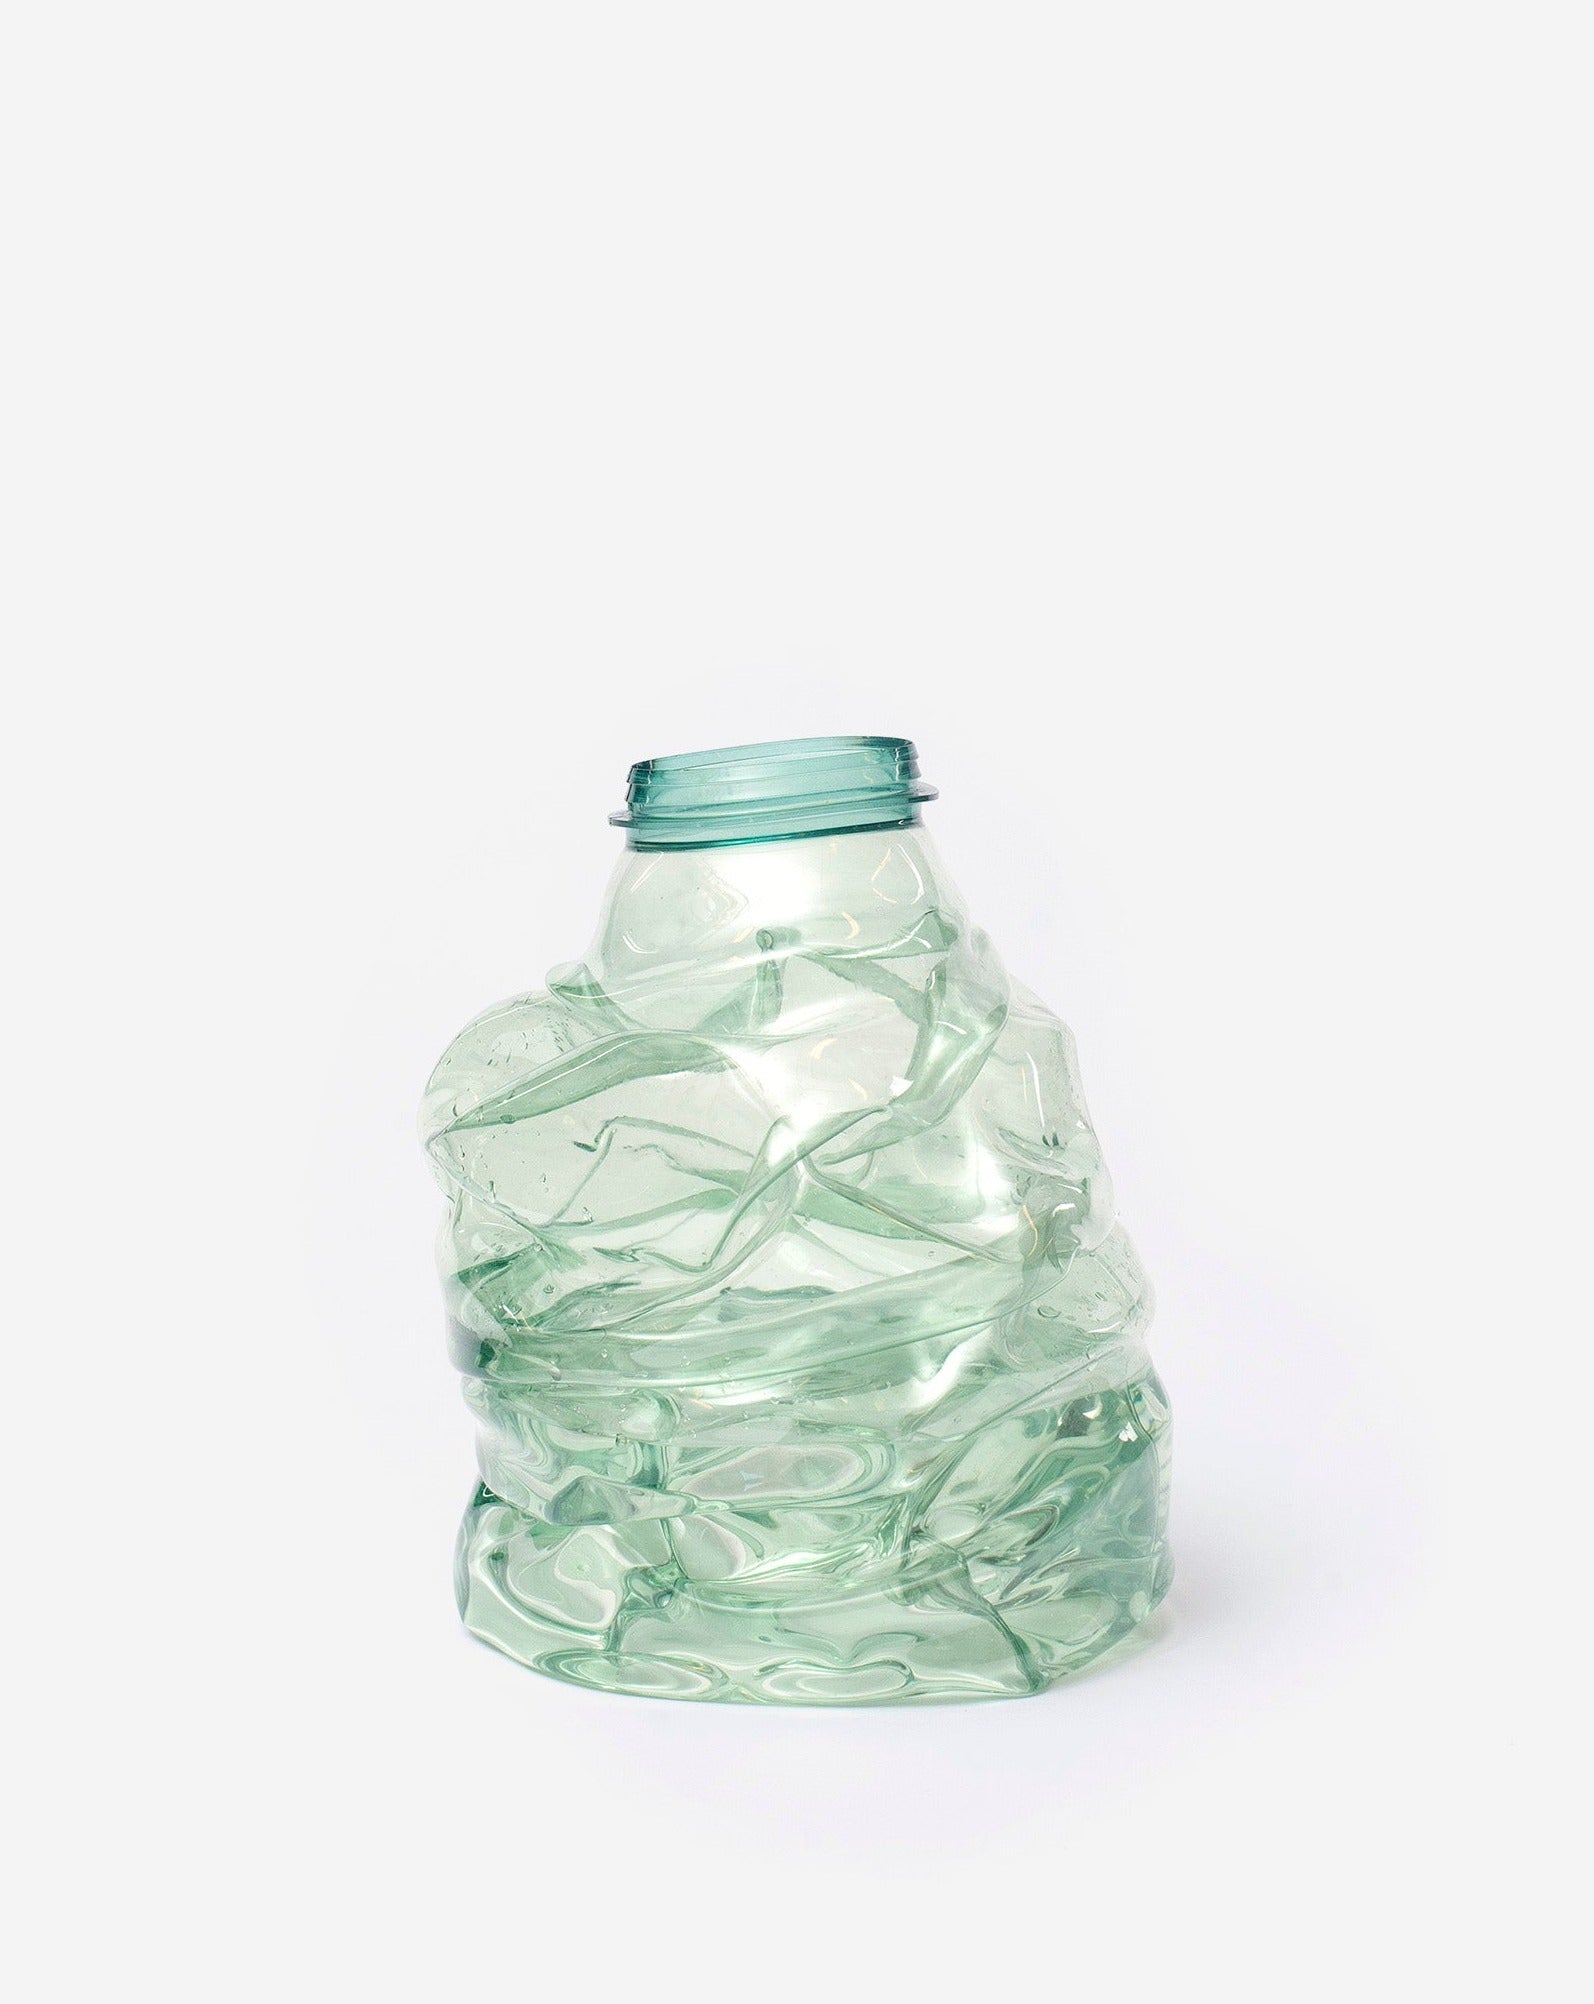 Small green handmade recycled plastic vase on white background